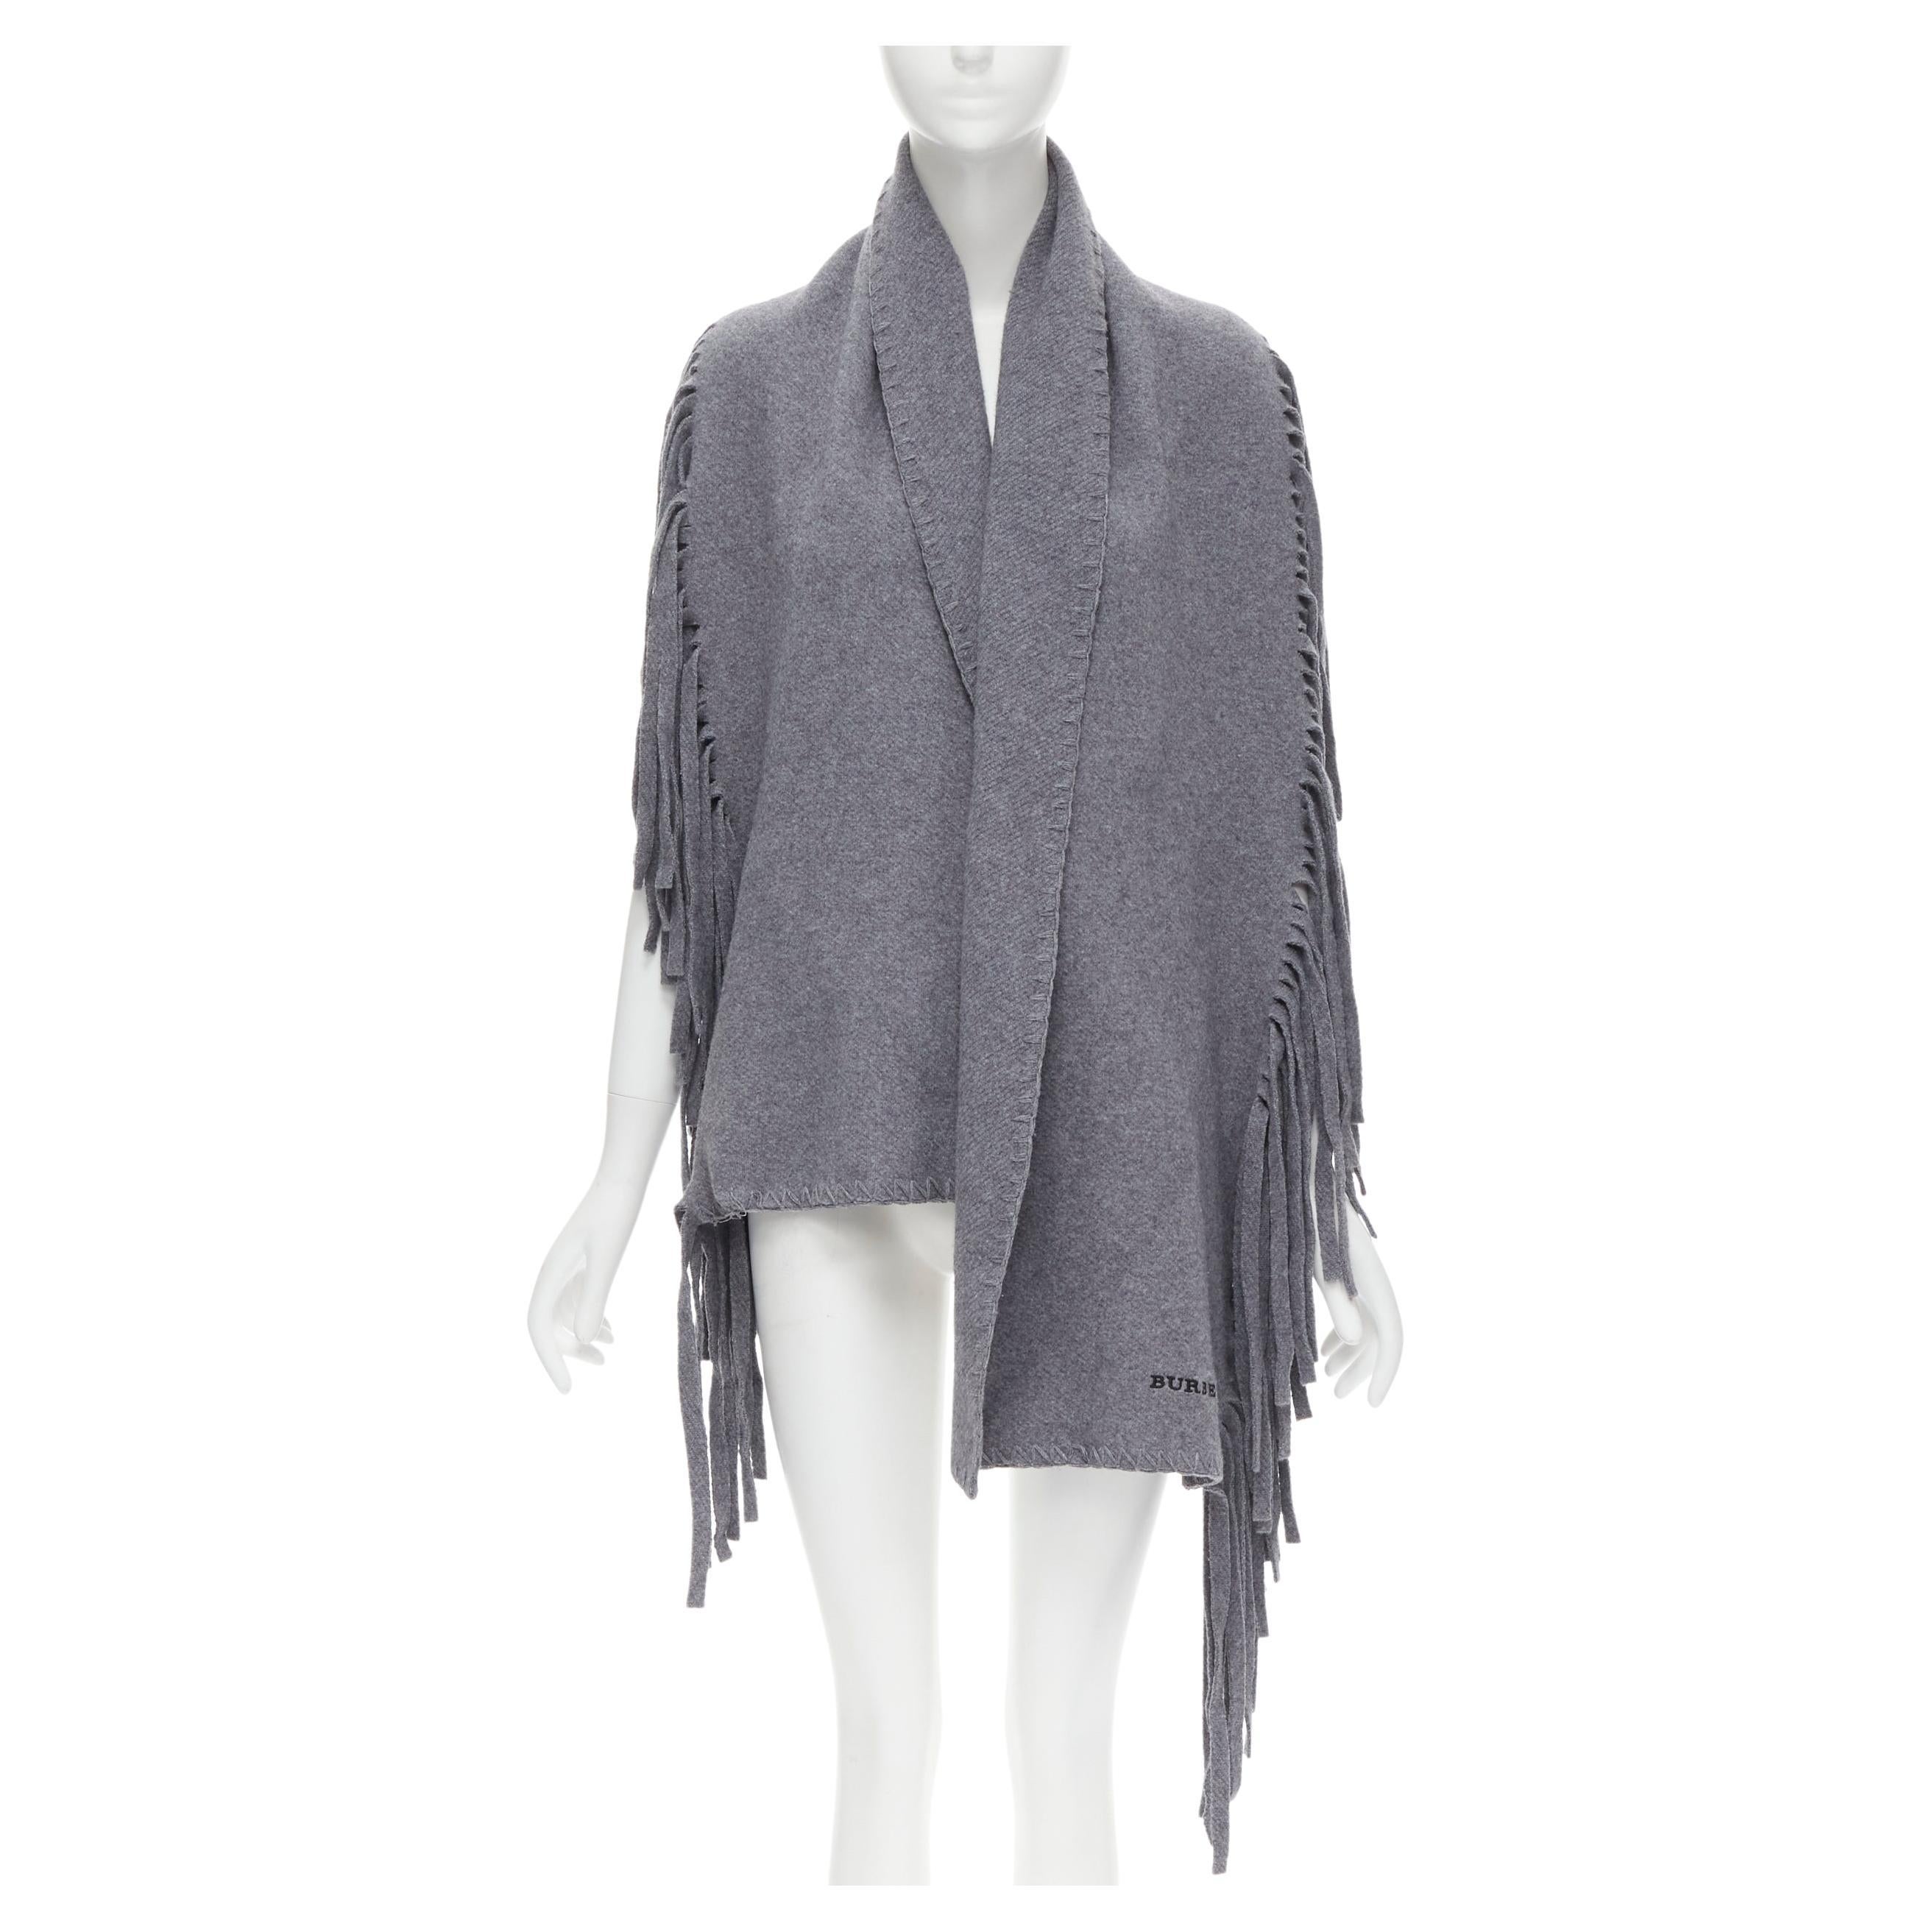 WOMEN FASHION Accessories Shawl Golden Gray/Golden Single discount 71% NoName Gray scarf with fringes 